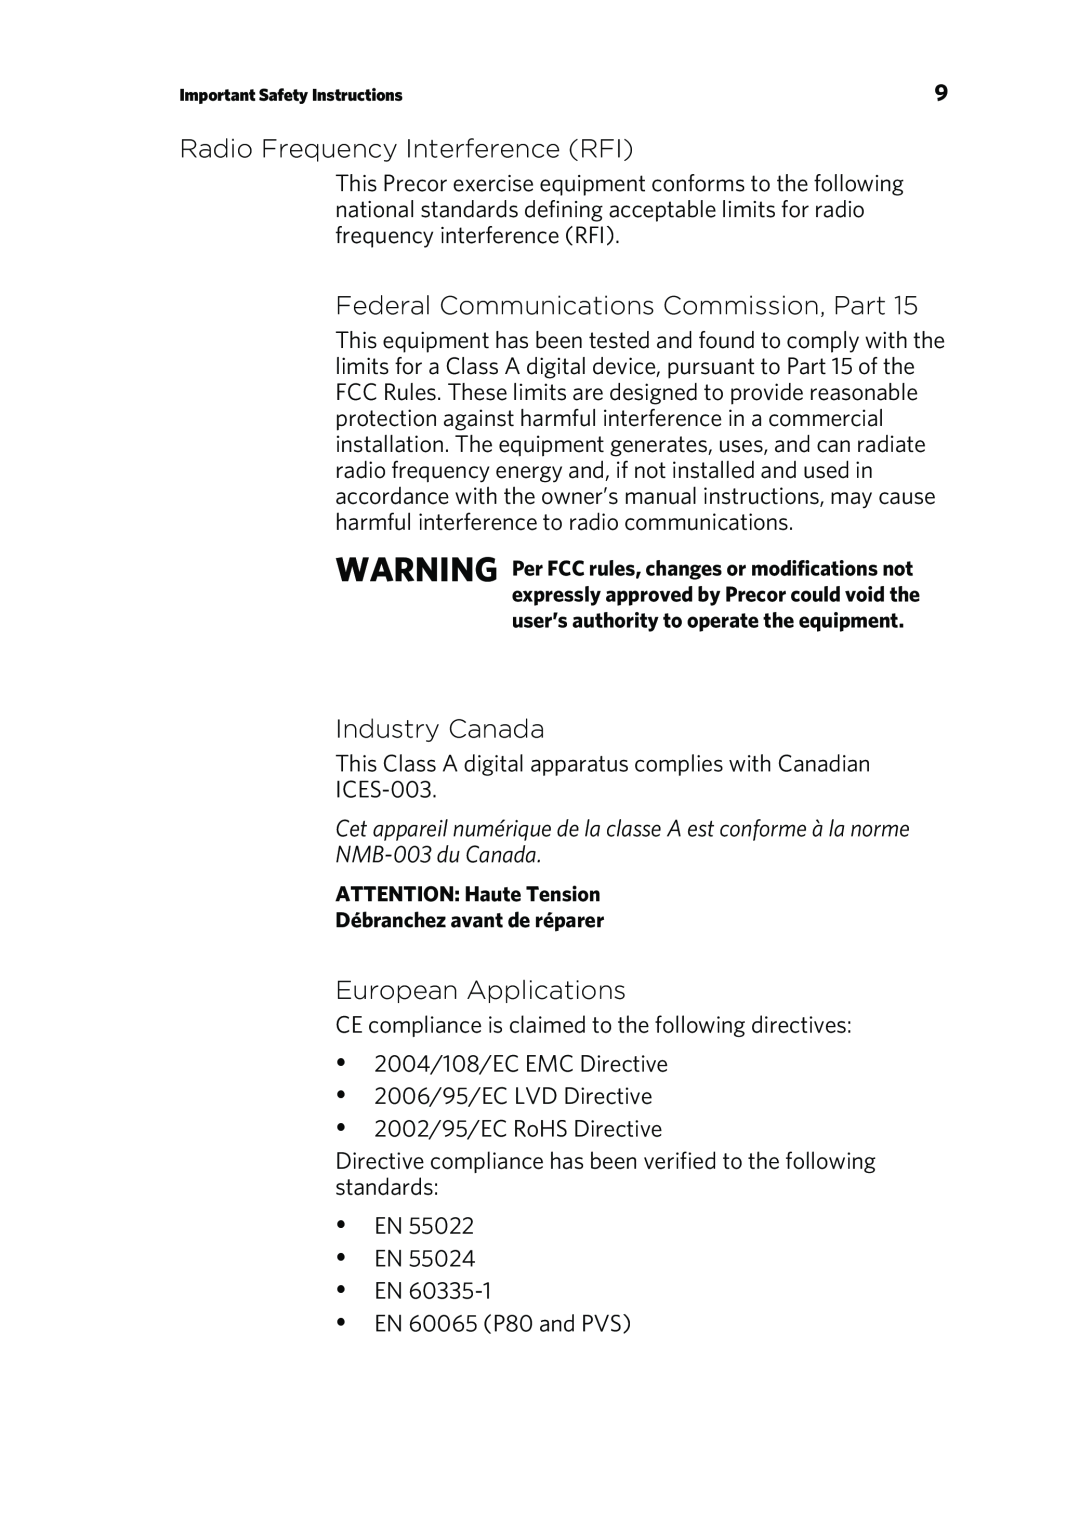 Precor P80 Radio Frequency Interference RFI, Federal Communications Commission, Part, Industry Canada, NMB-003du Canada 